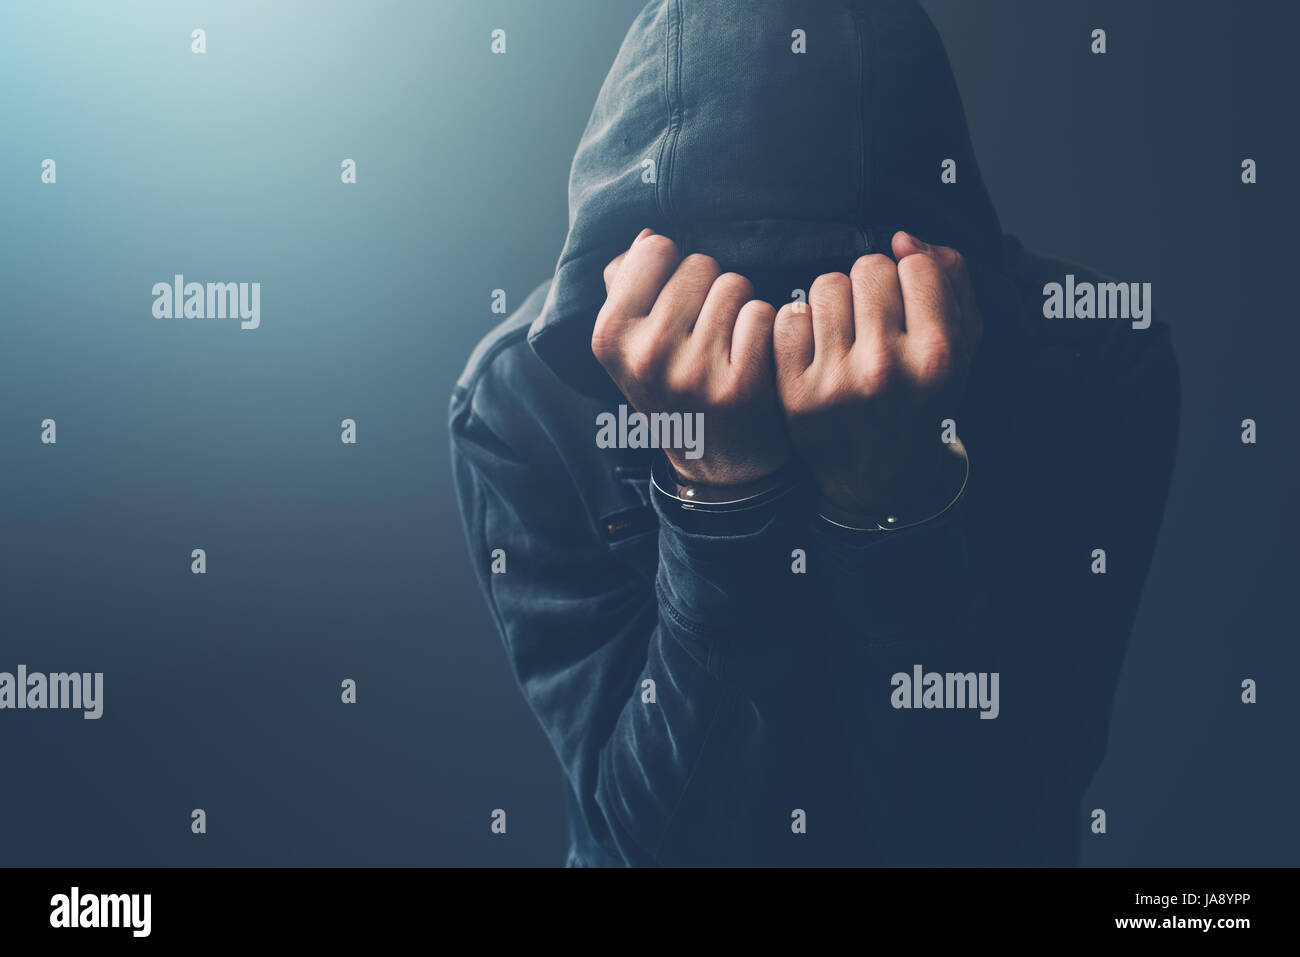 Arrested computer hacker and cyber criminal with handcuffs wearing hooded jacket hiding face Stock Photo